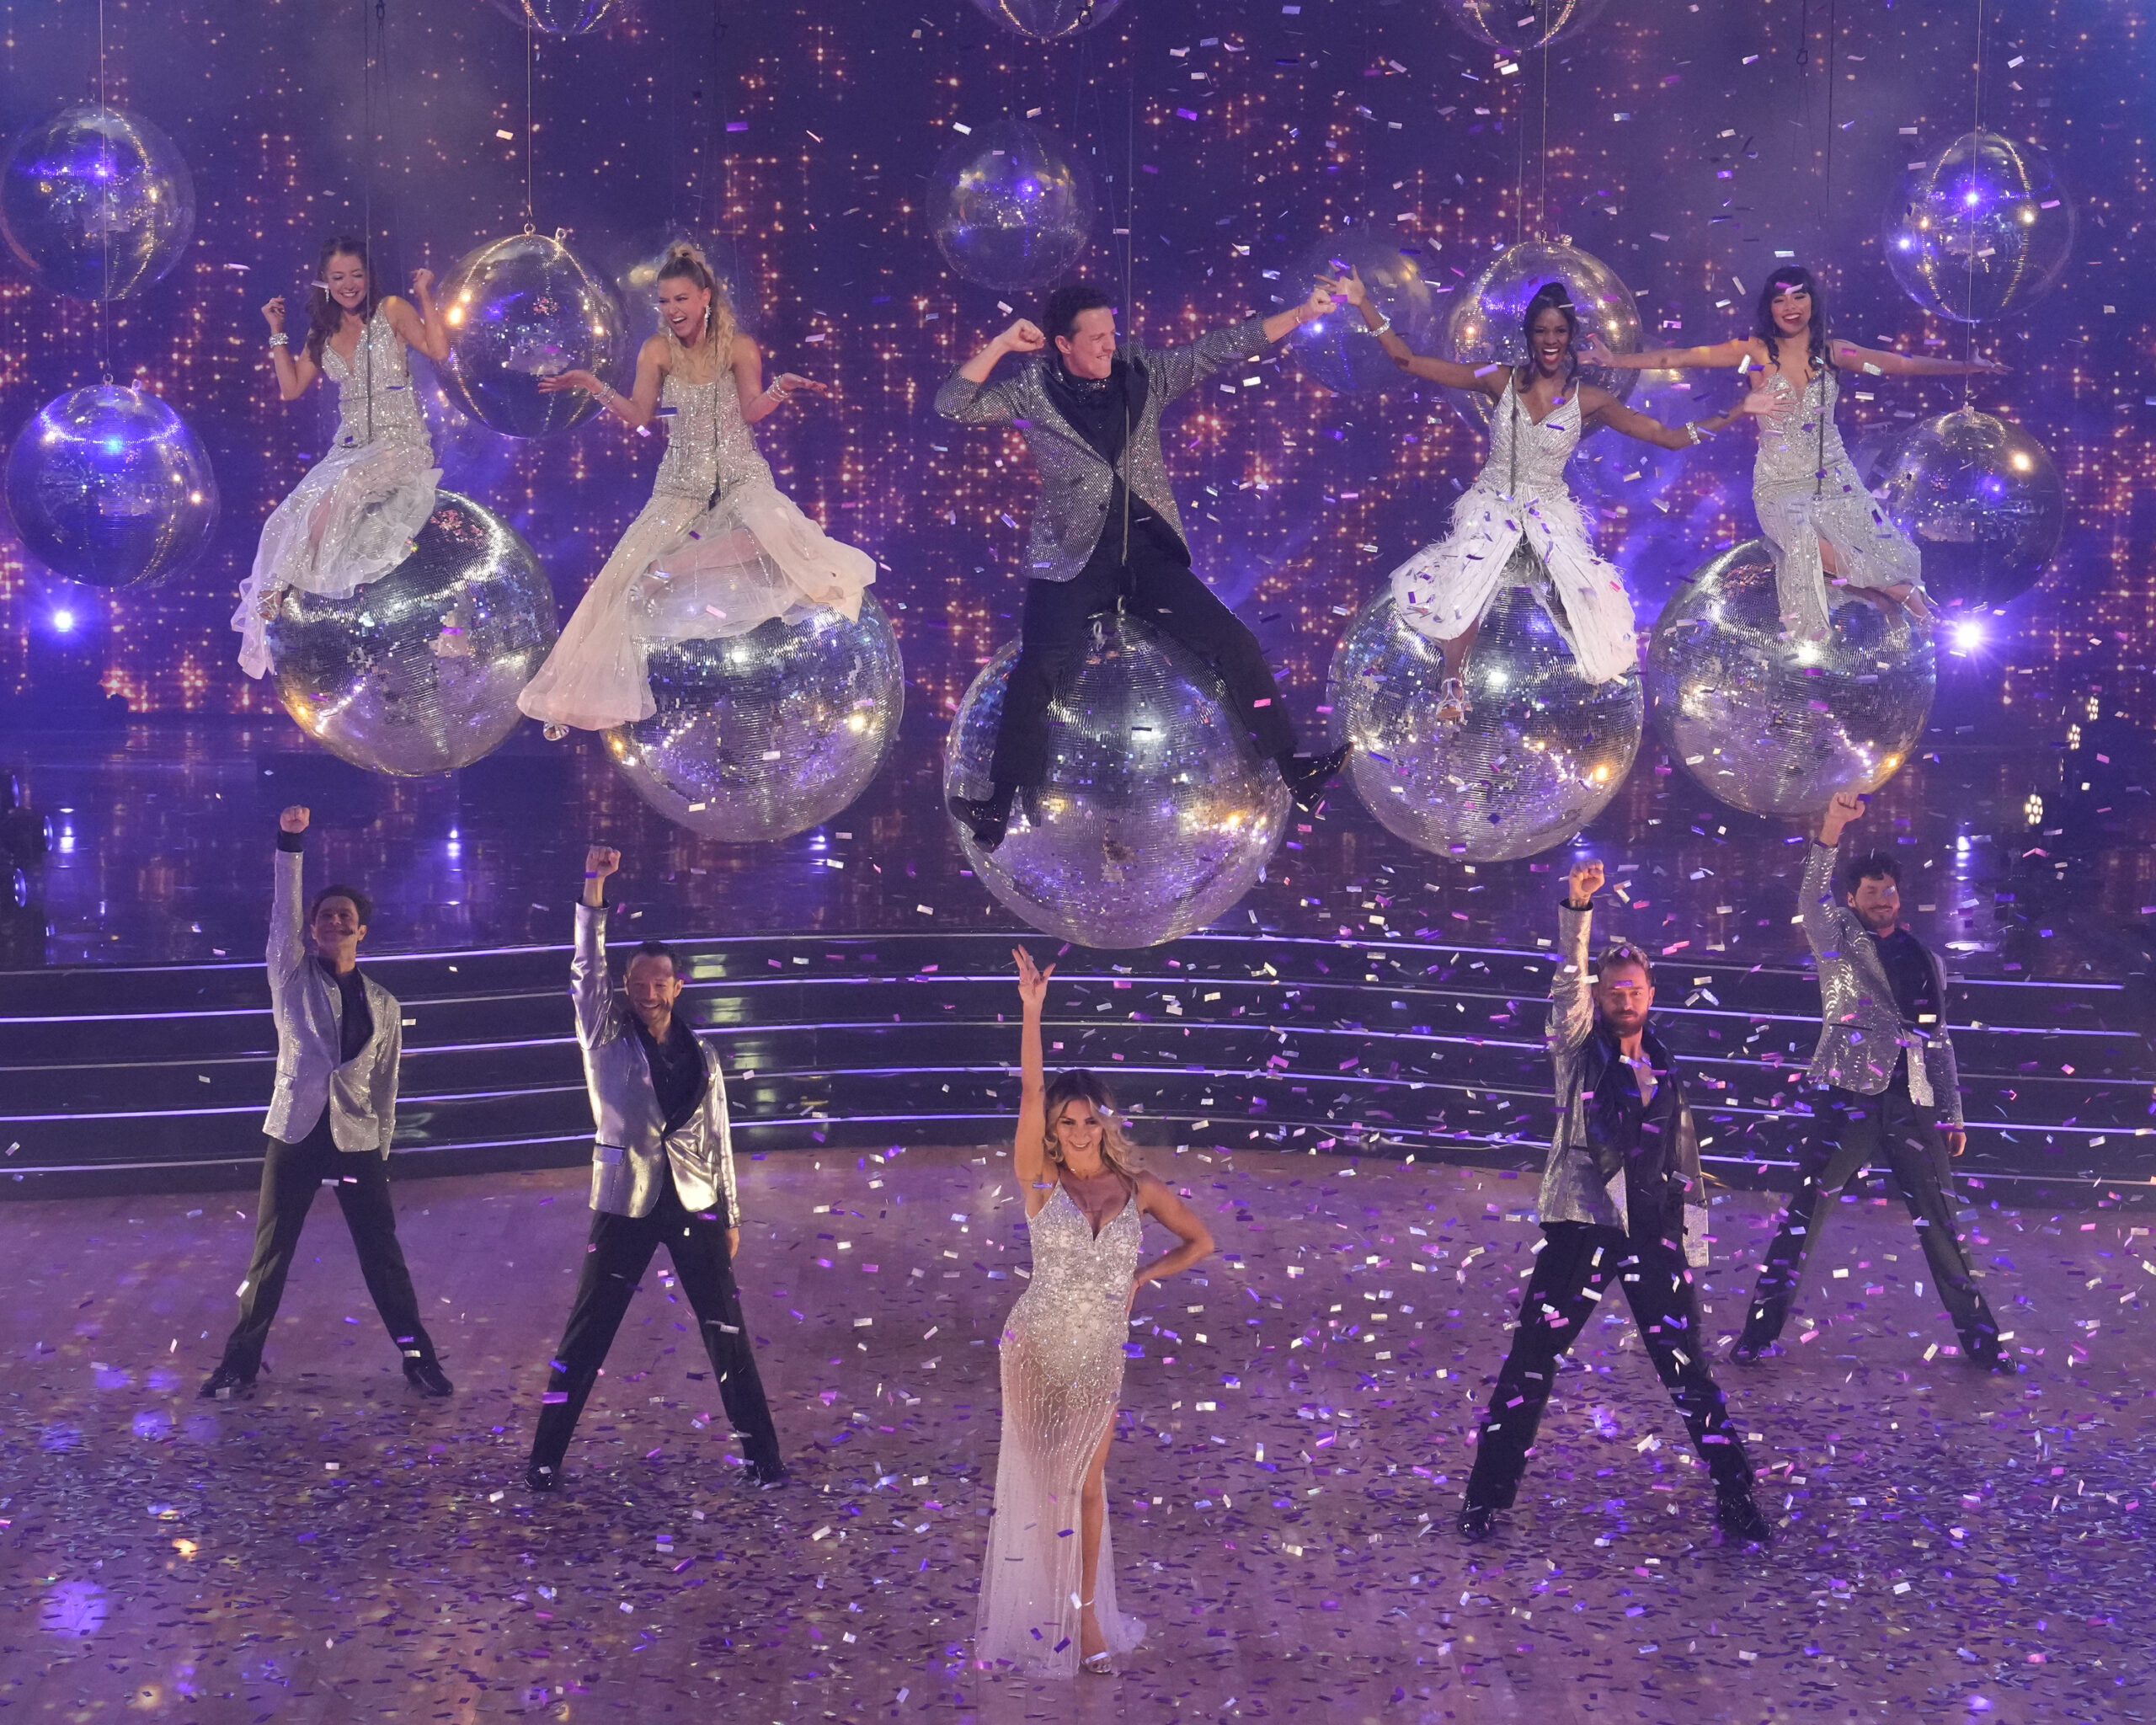 The Season 32 finalists perform in the finale for a chance to win the Len Goodman Mirrorball Trophy.